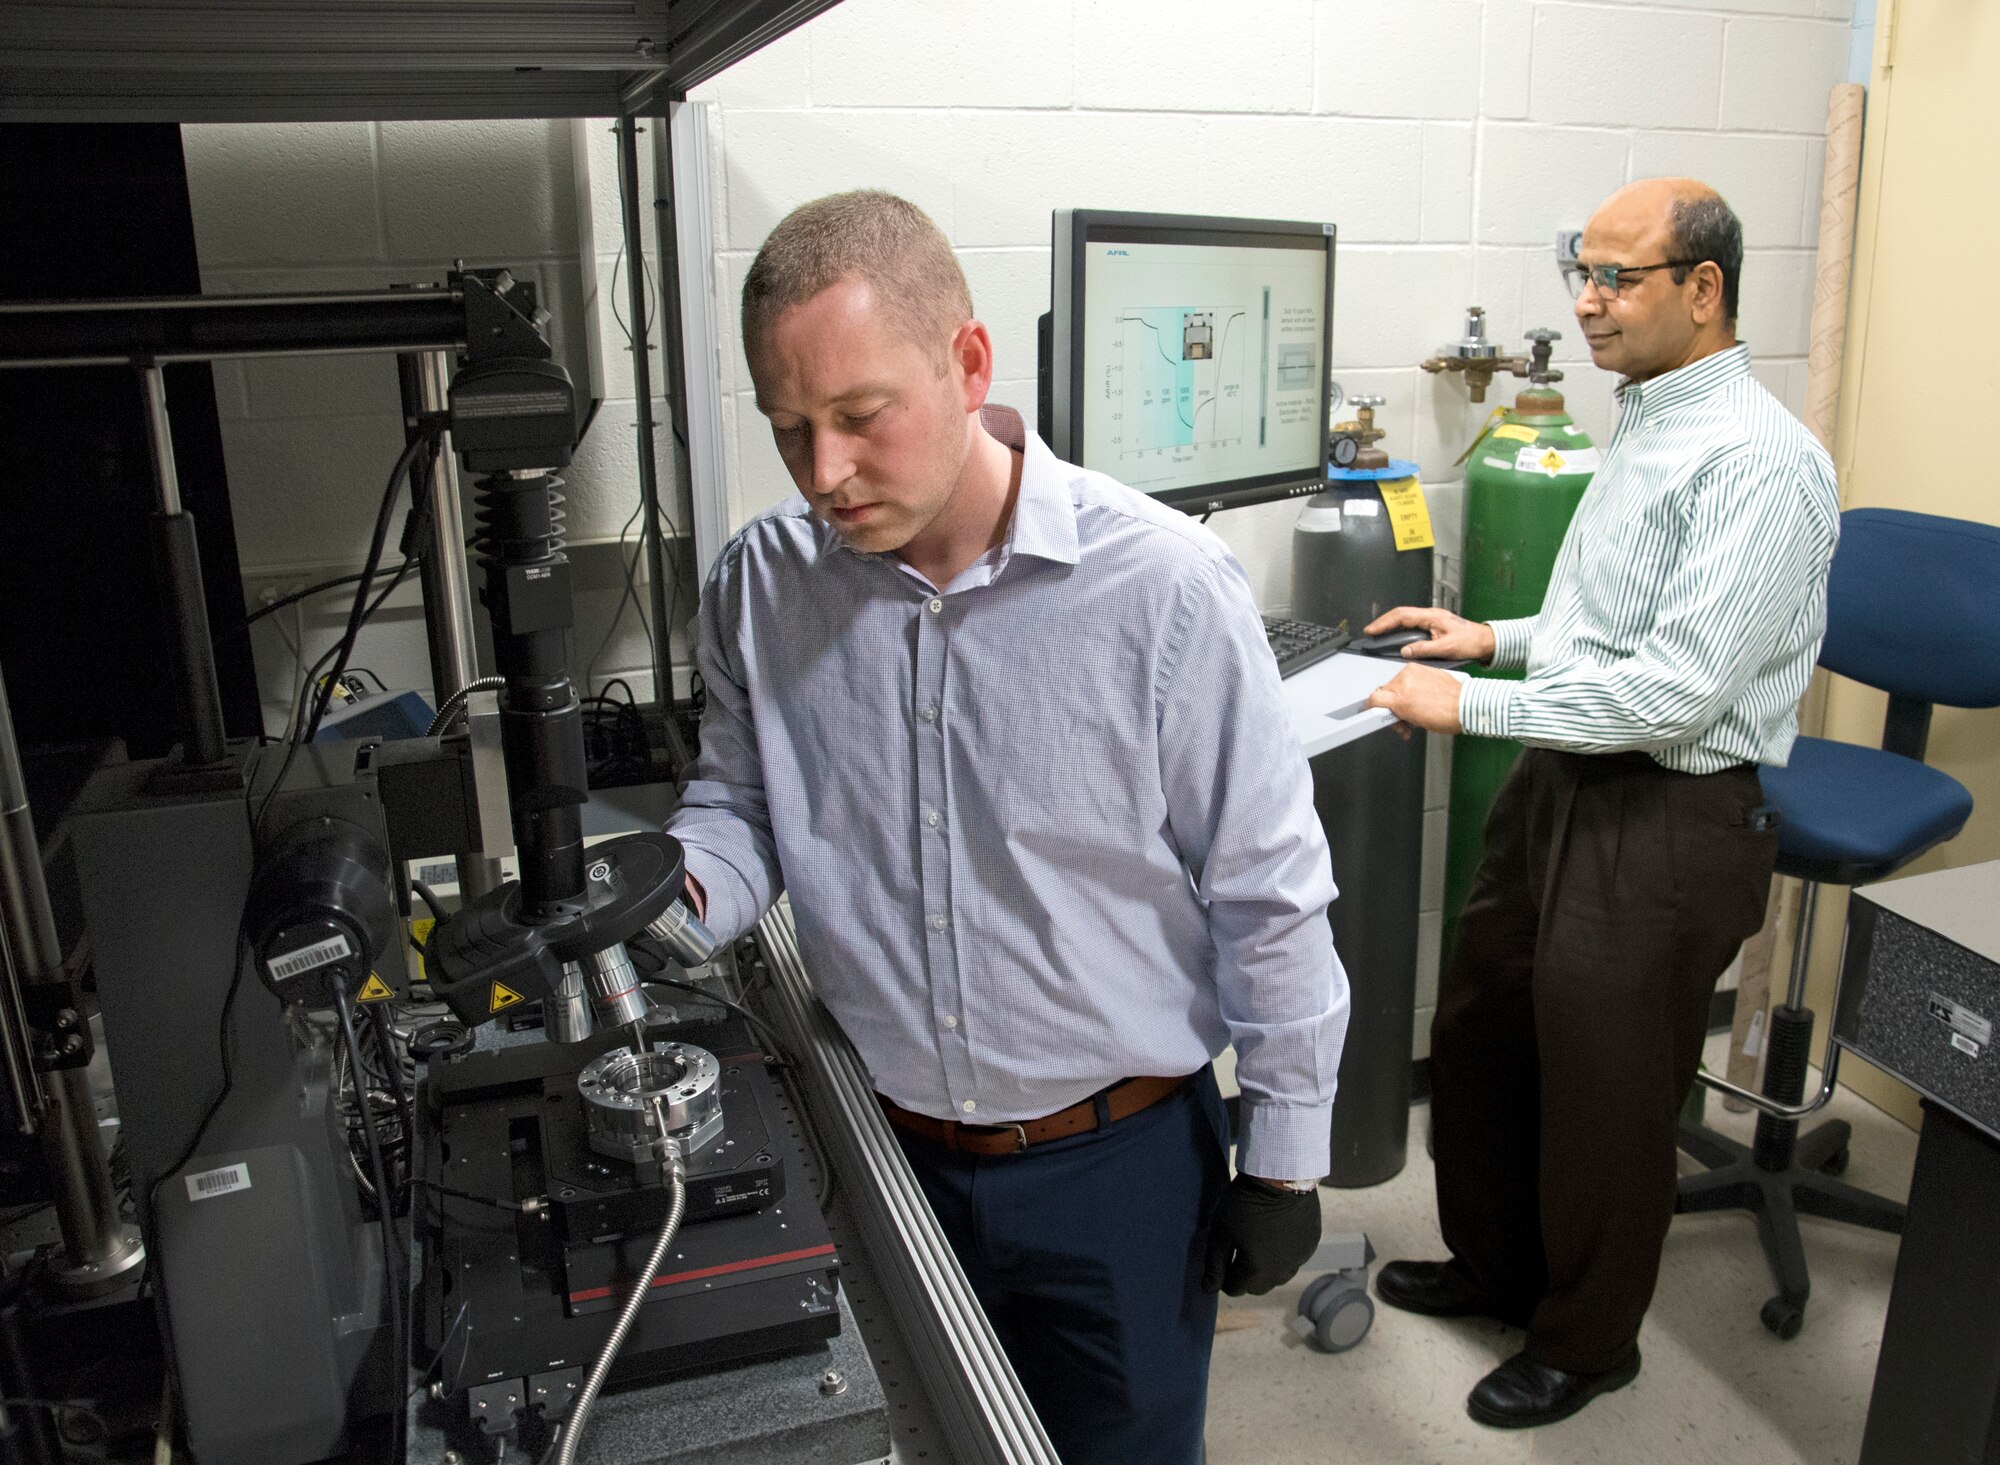 Researchers Dr. Nicholas Glavin (left) and Dr. Ajit Roy are working to develop flexible, wearable toxic agent detectors.